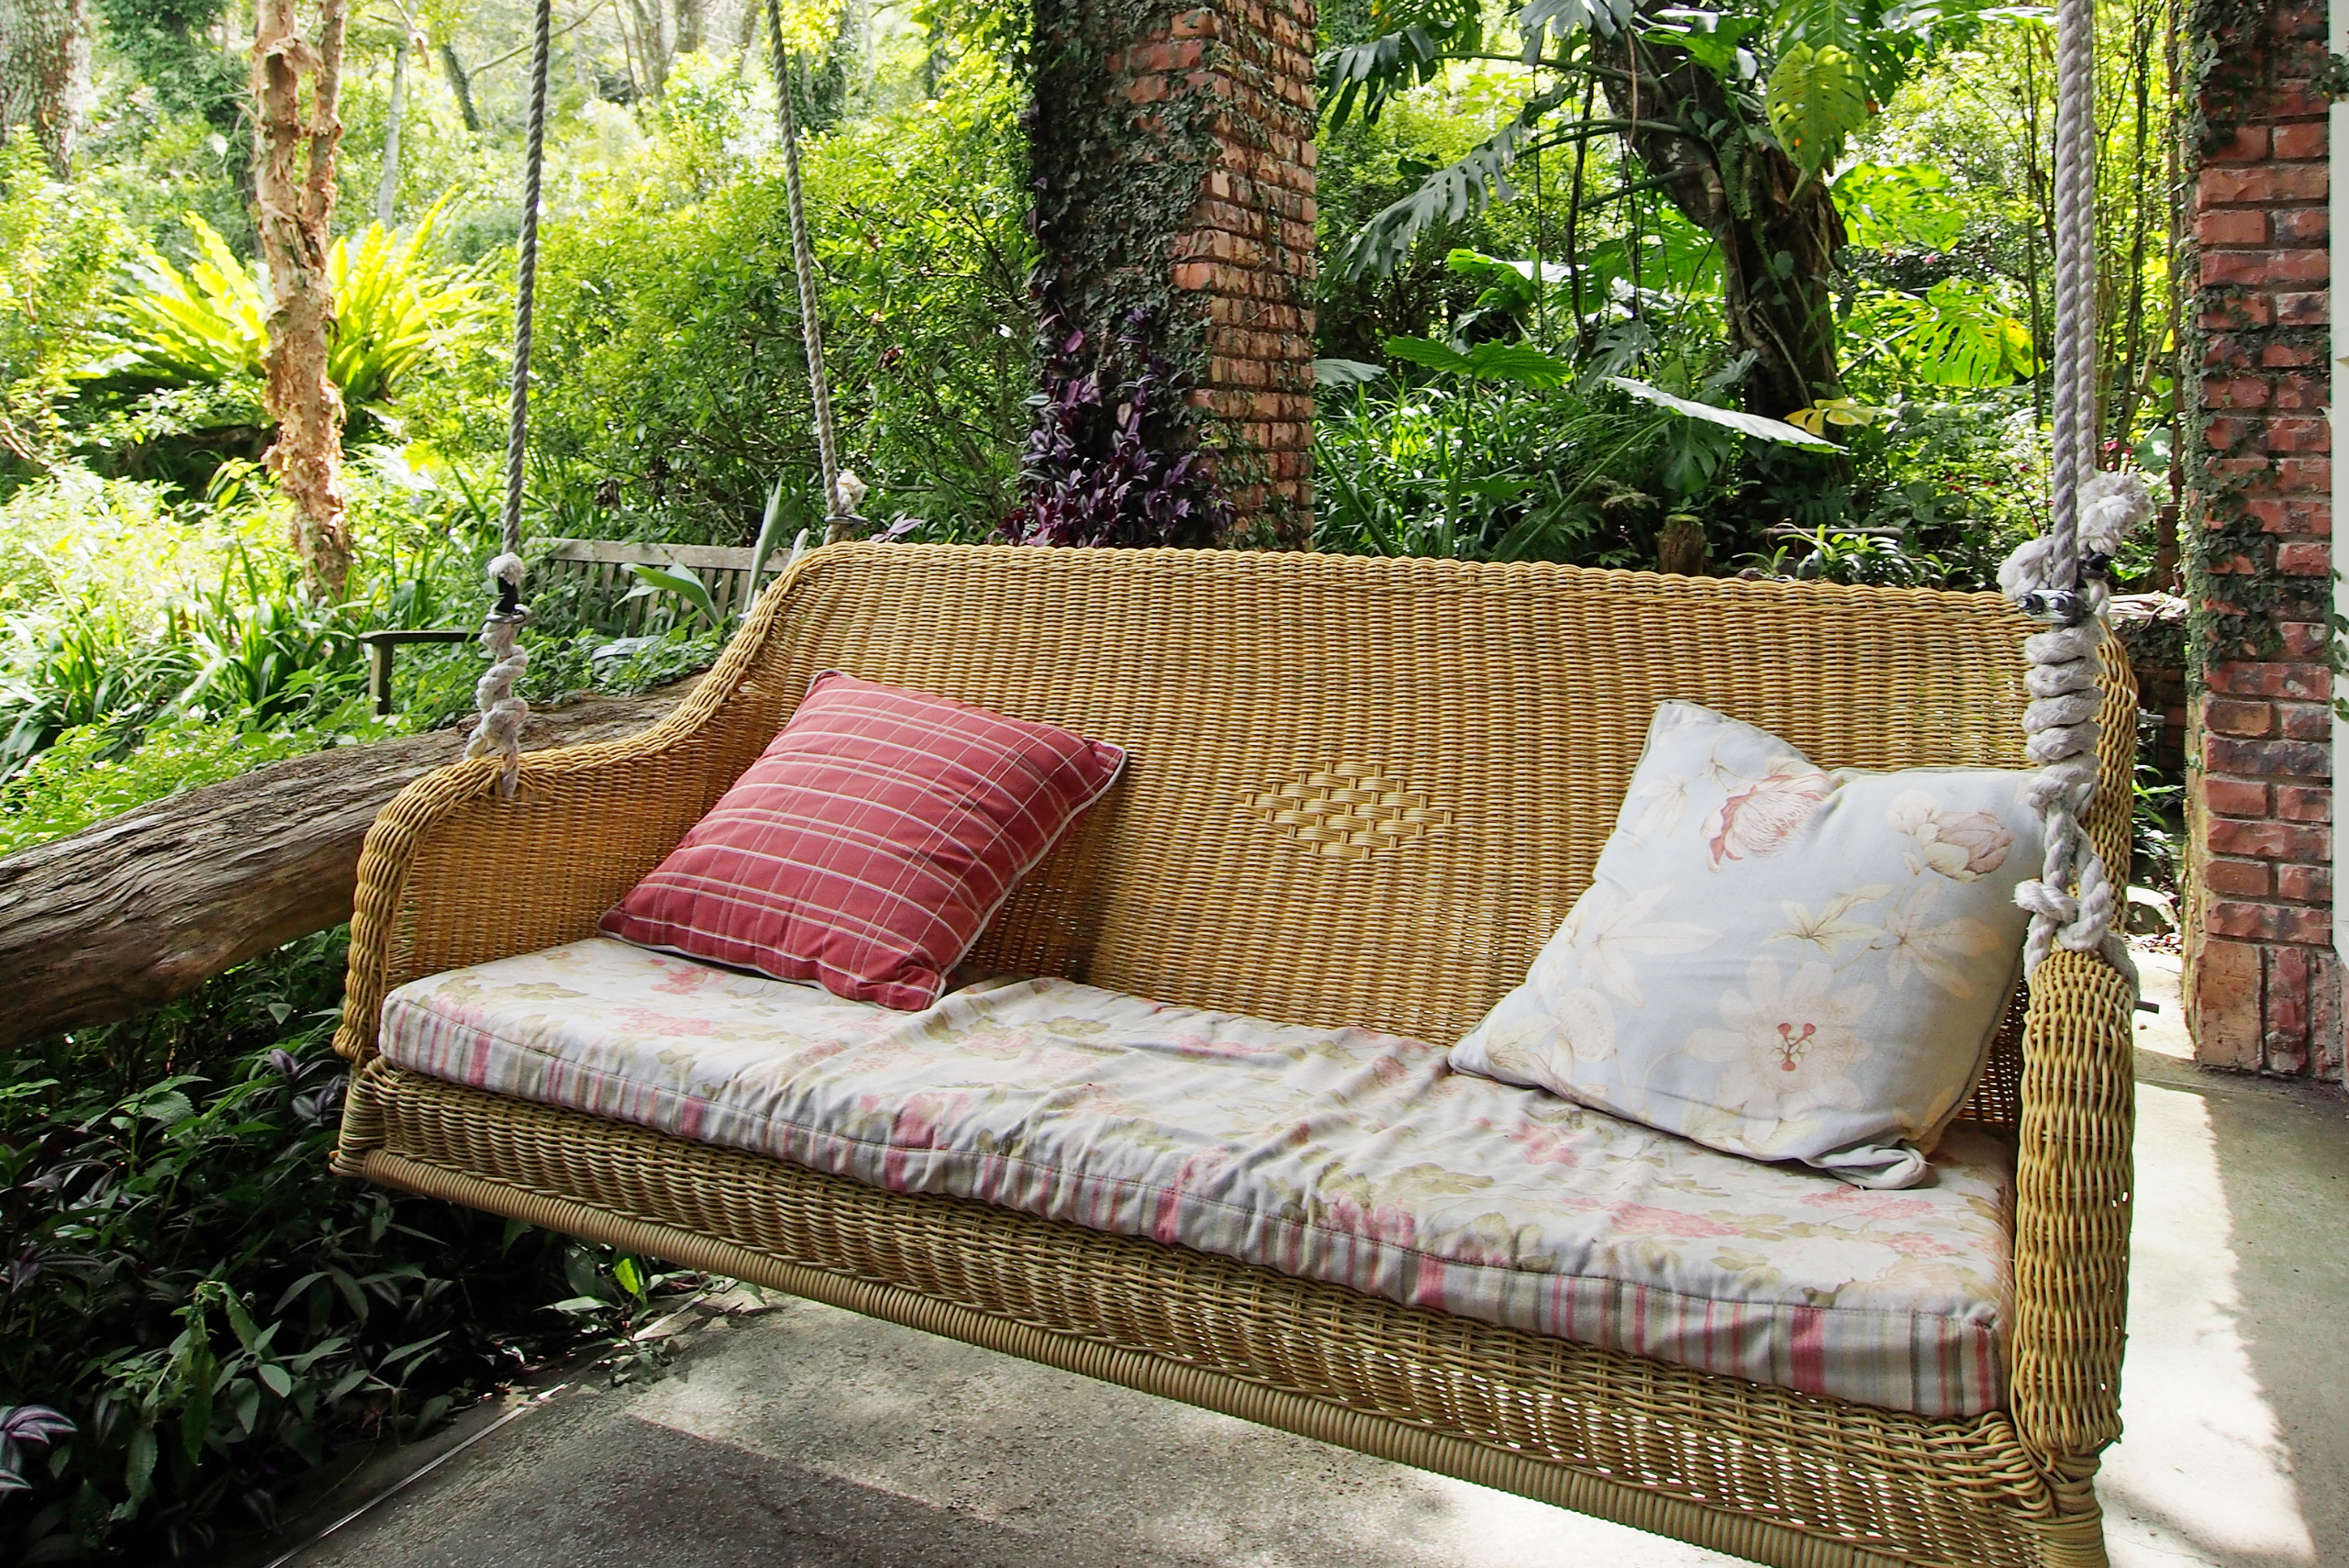 A patio swing made of whicker material.